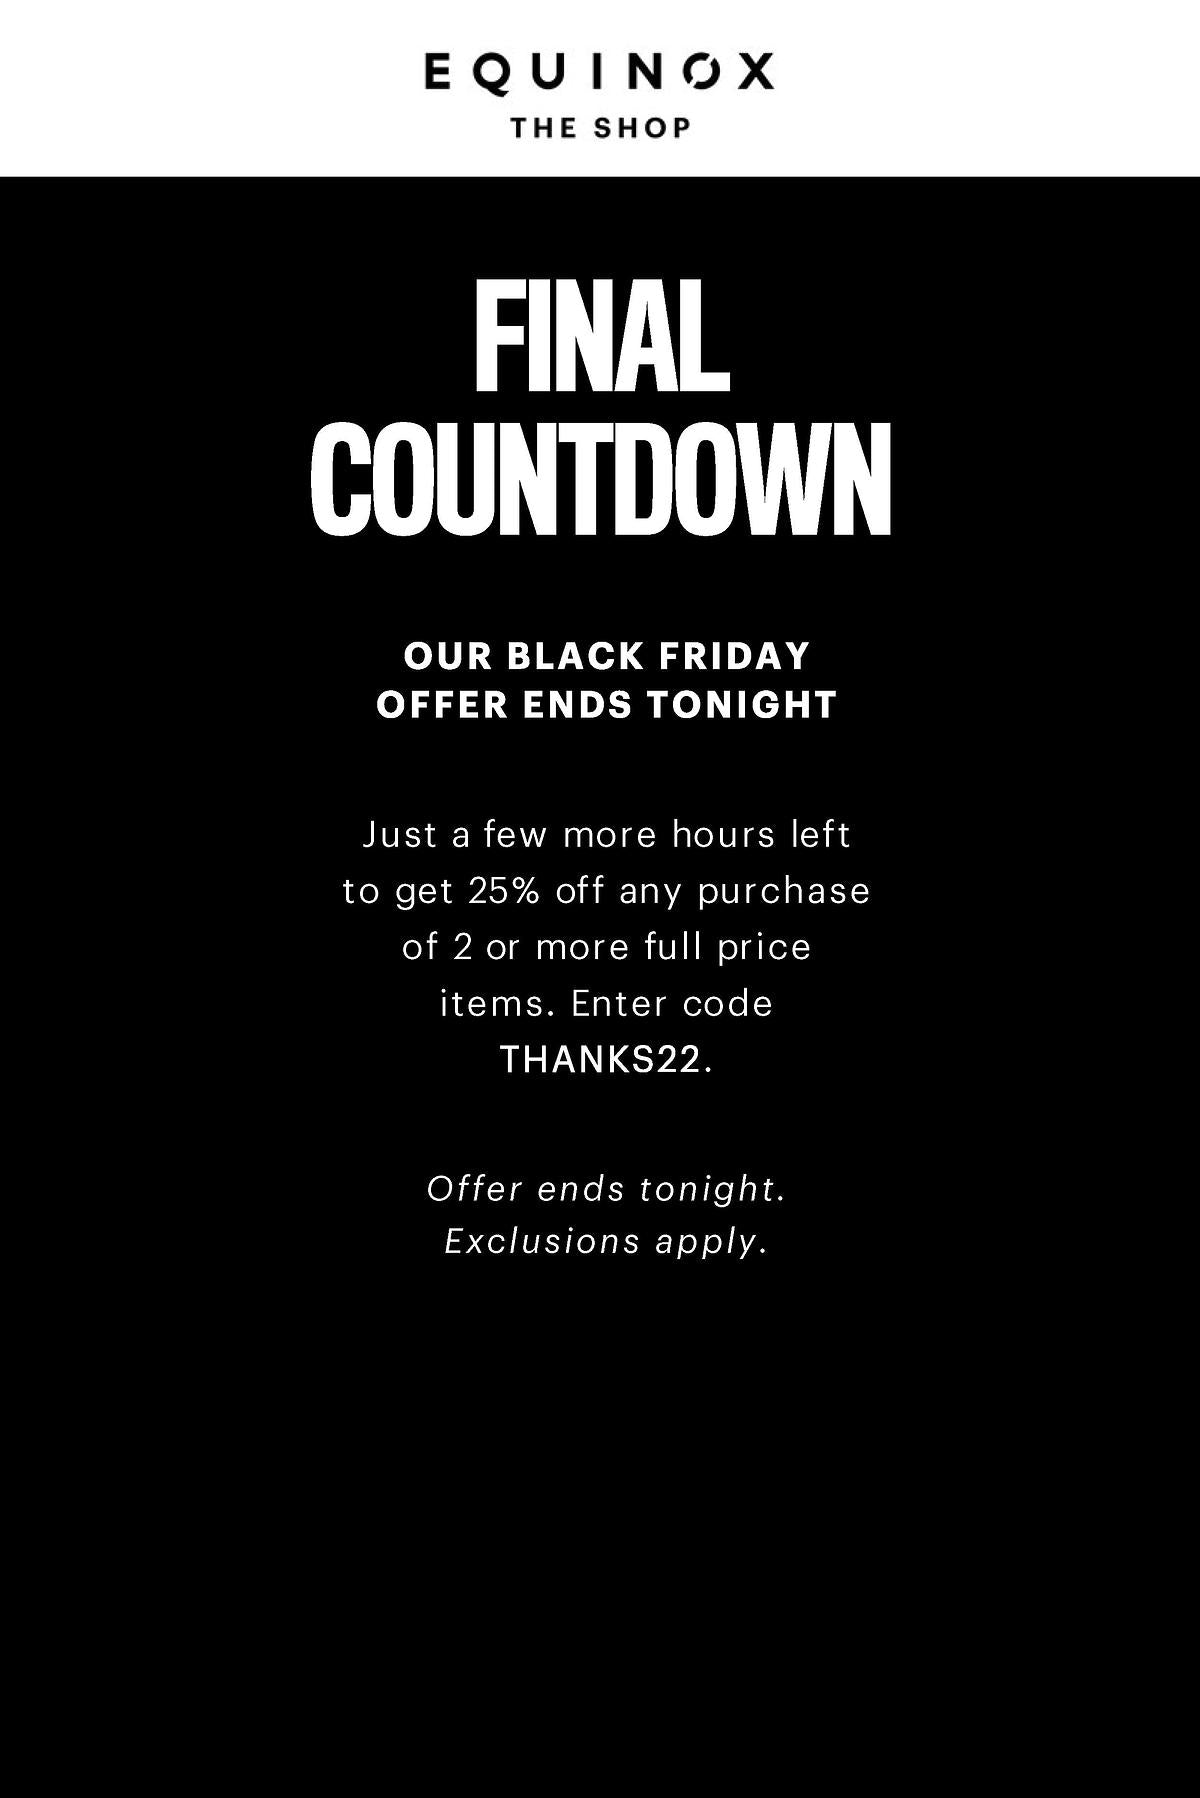 Only A Few Hours Left For Our Black Friday Offer At Equinox